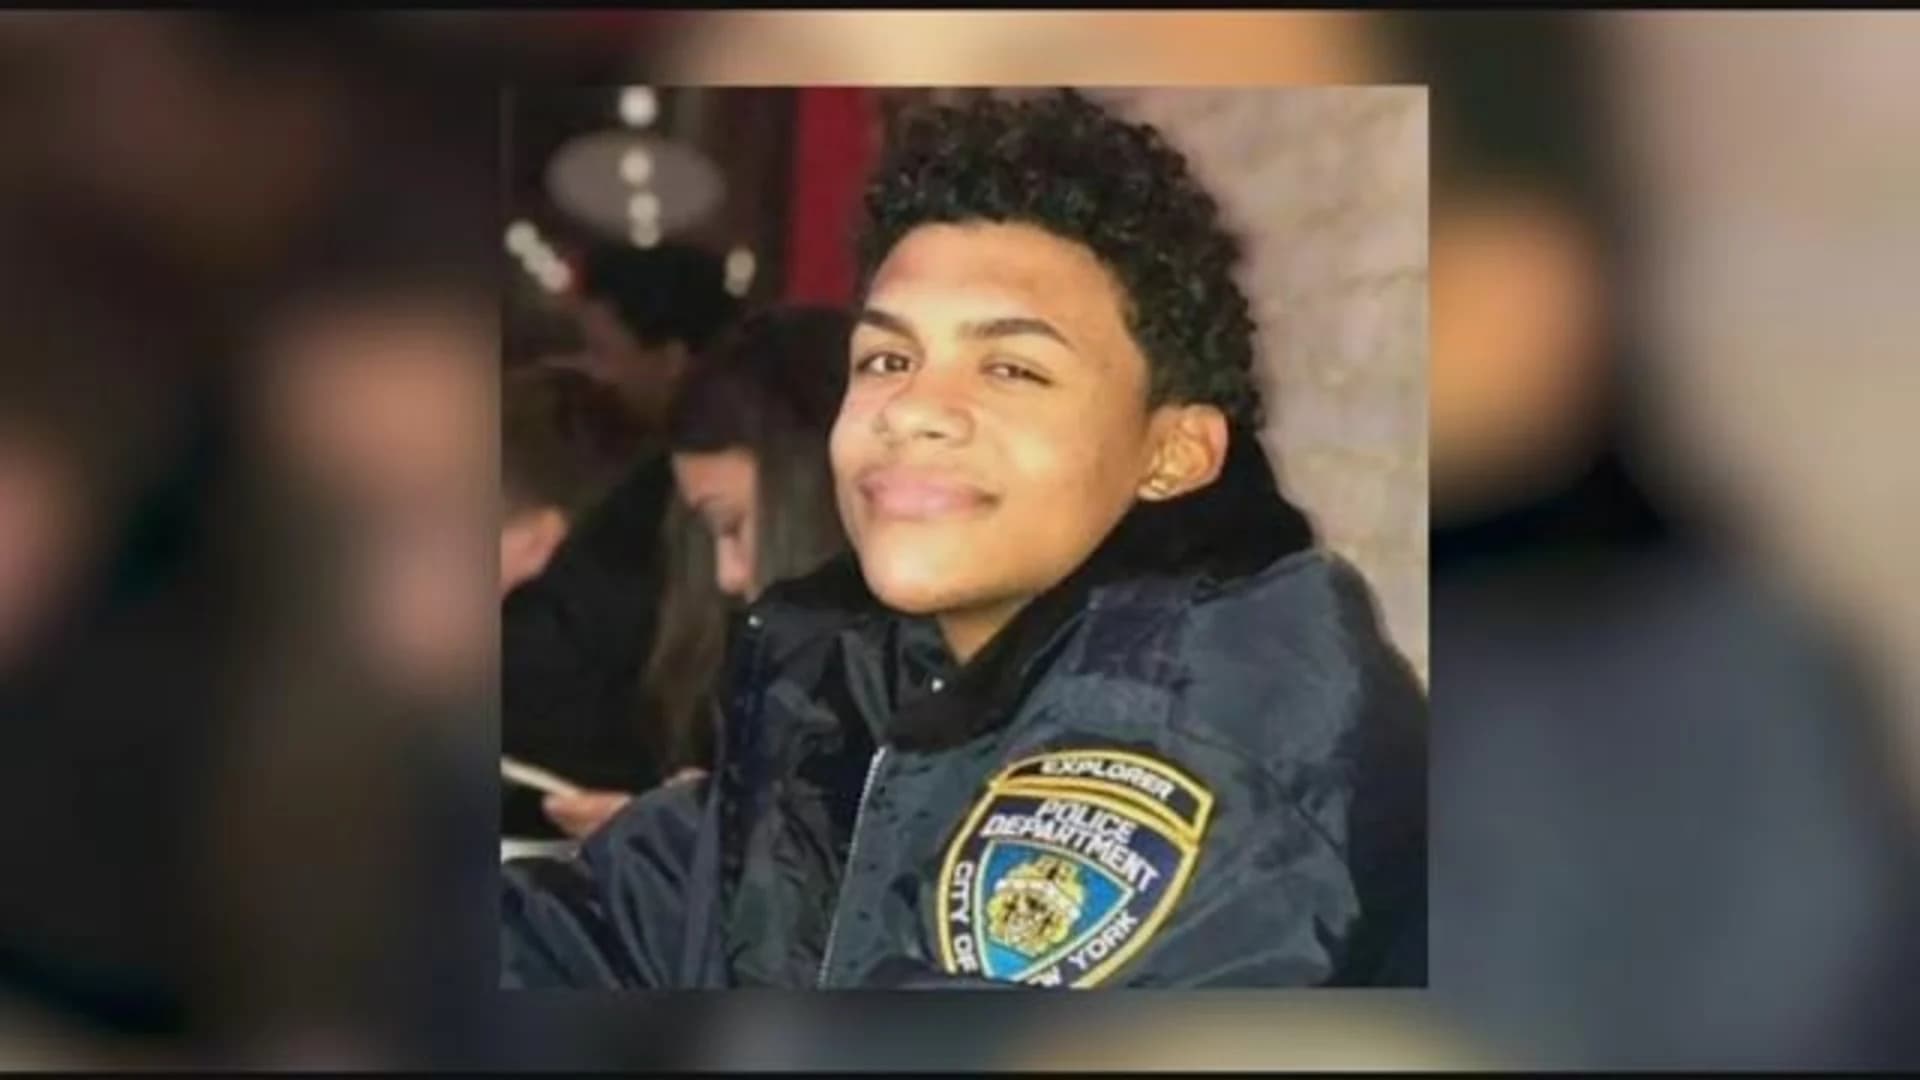 Bronx teen ‘Junior’ honored with street co-naming in Belmont